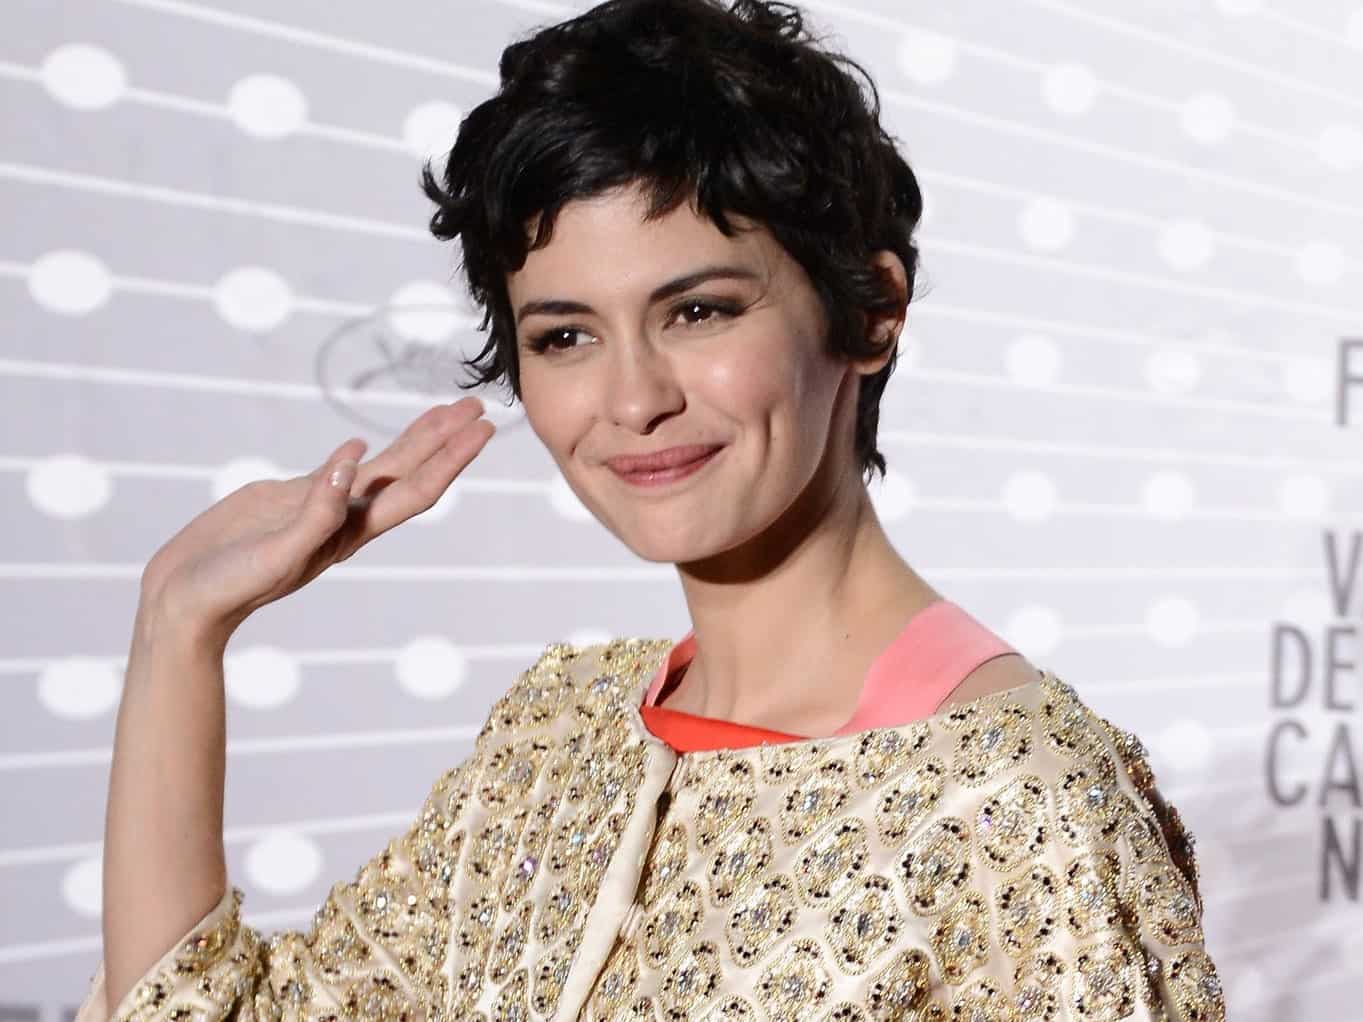 Audrey Tautou has an estimated net worth of $20 million